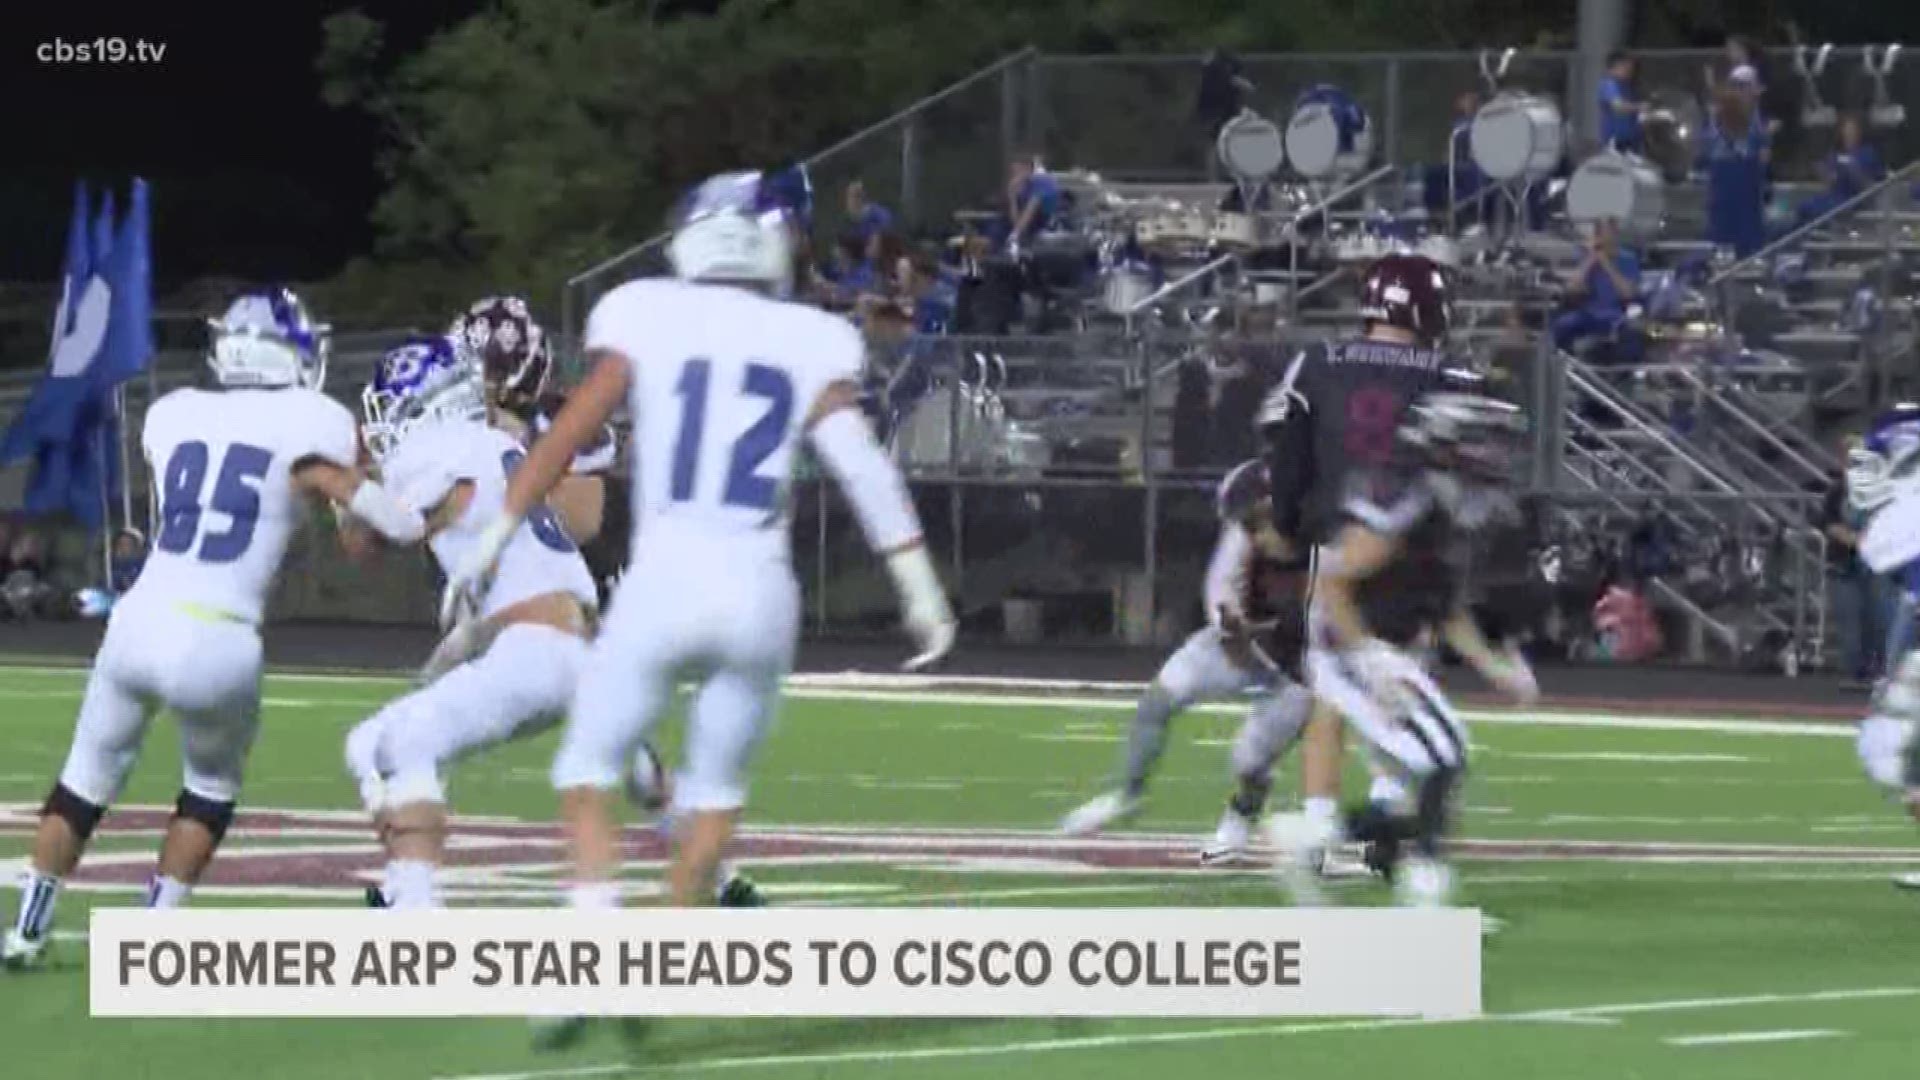 Cisco College has East Texas talent on roster